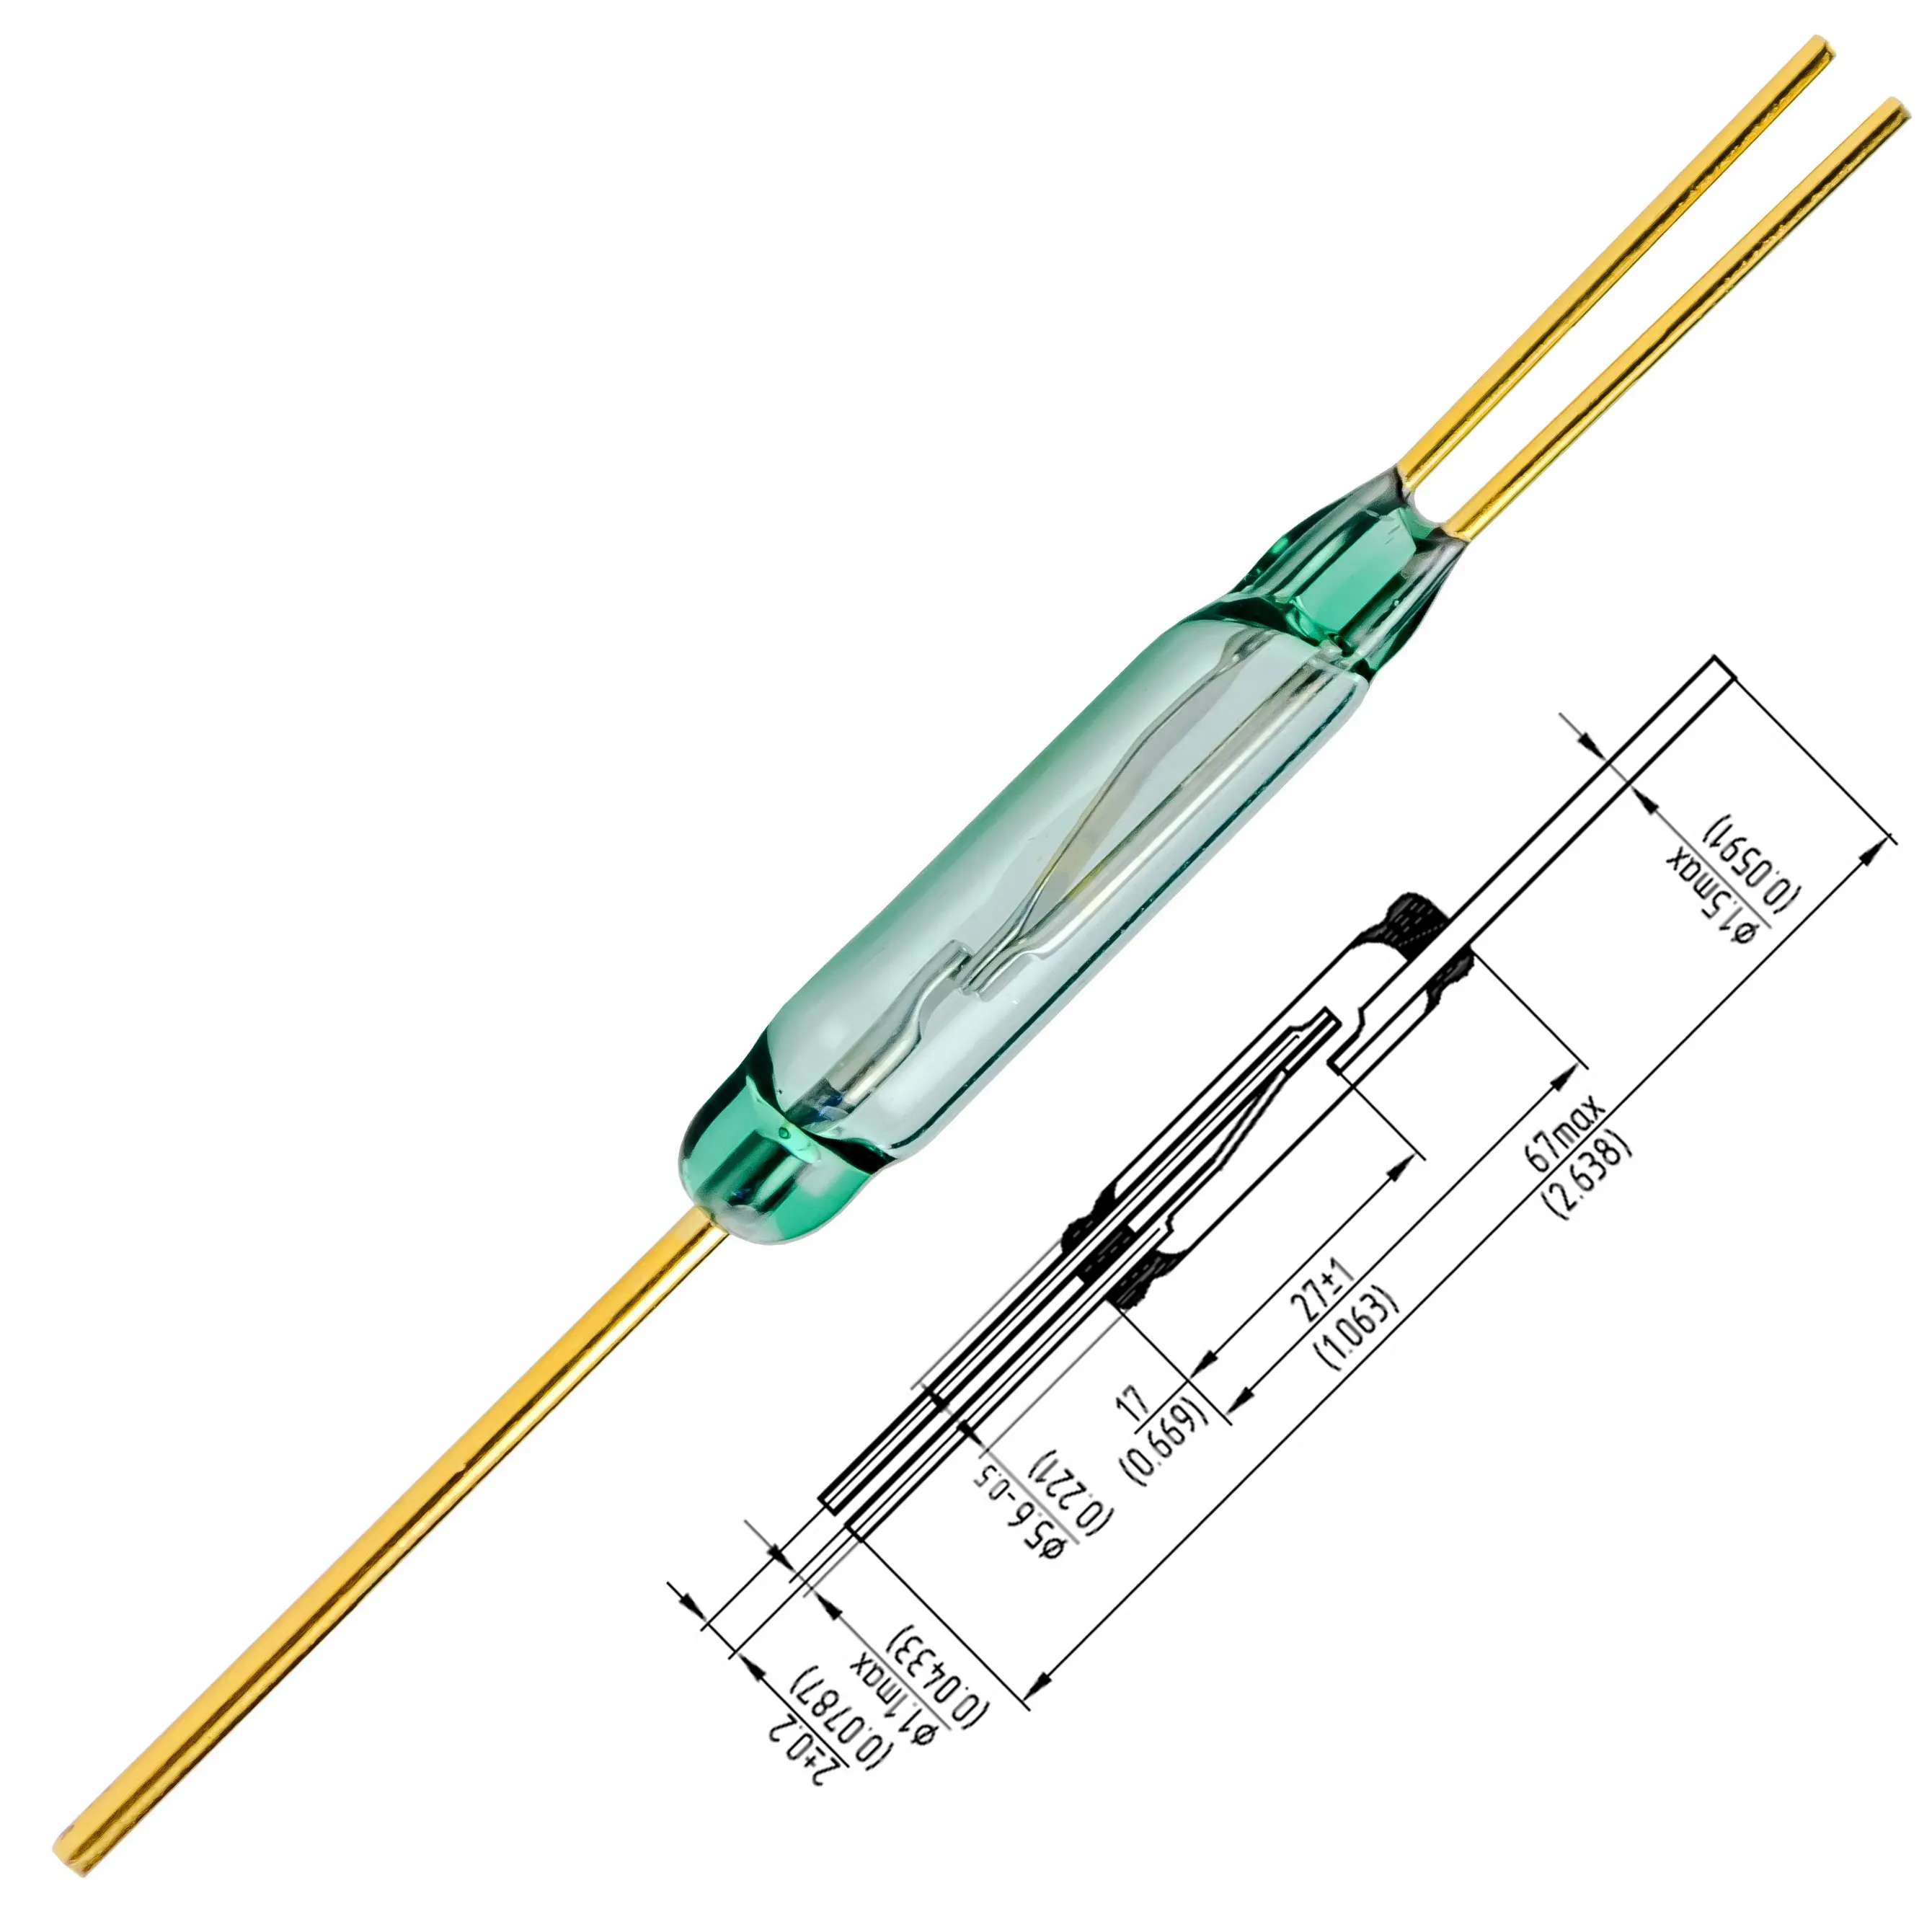 28mm Normally open and closed 3 leads MKC27103 glass dry reed switch for security and protection product